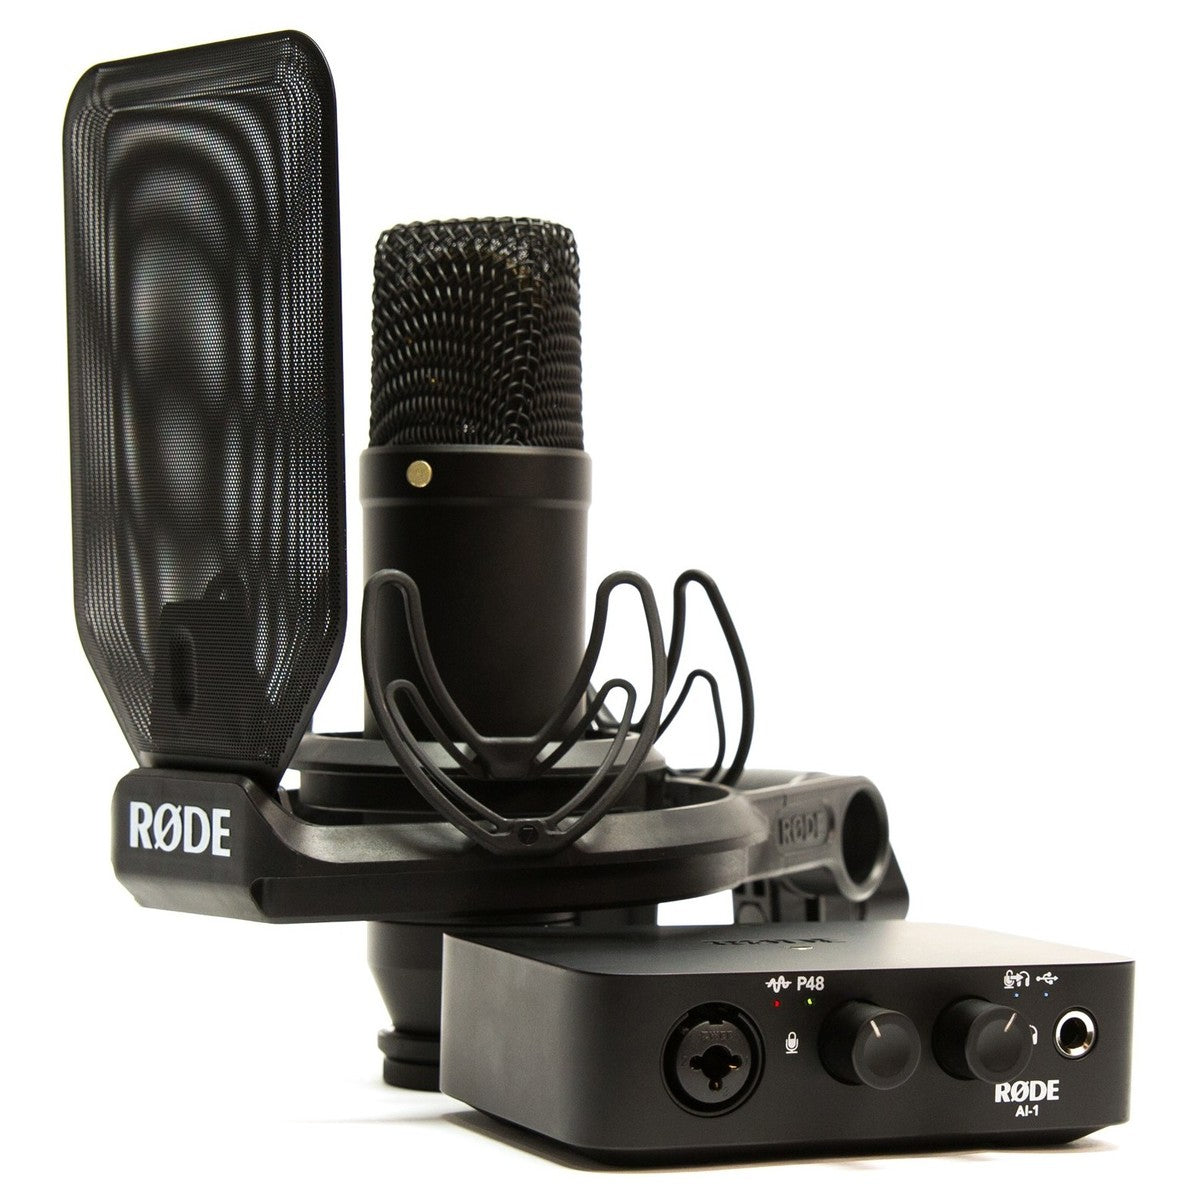 Rode AI-1 Complete Studio Bundle with Rode NT1